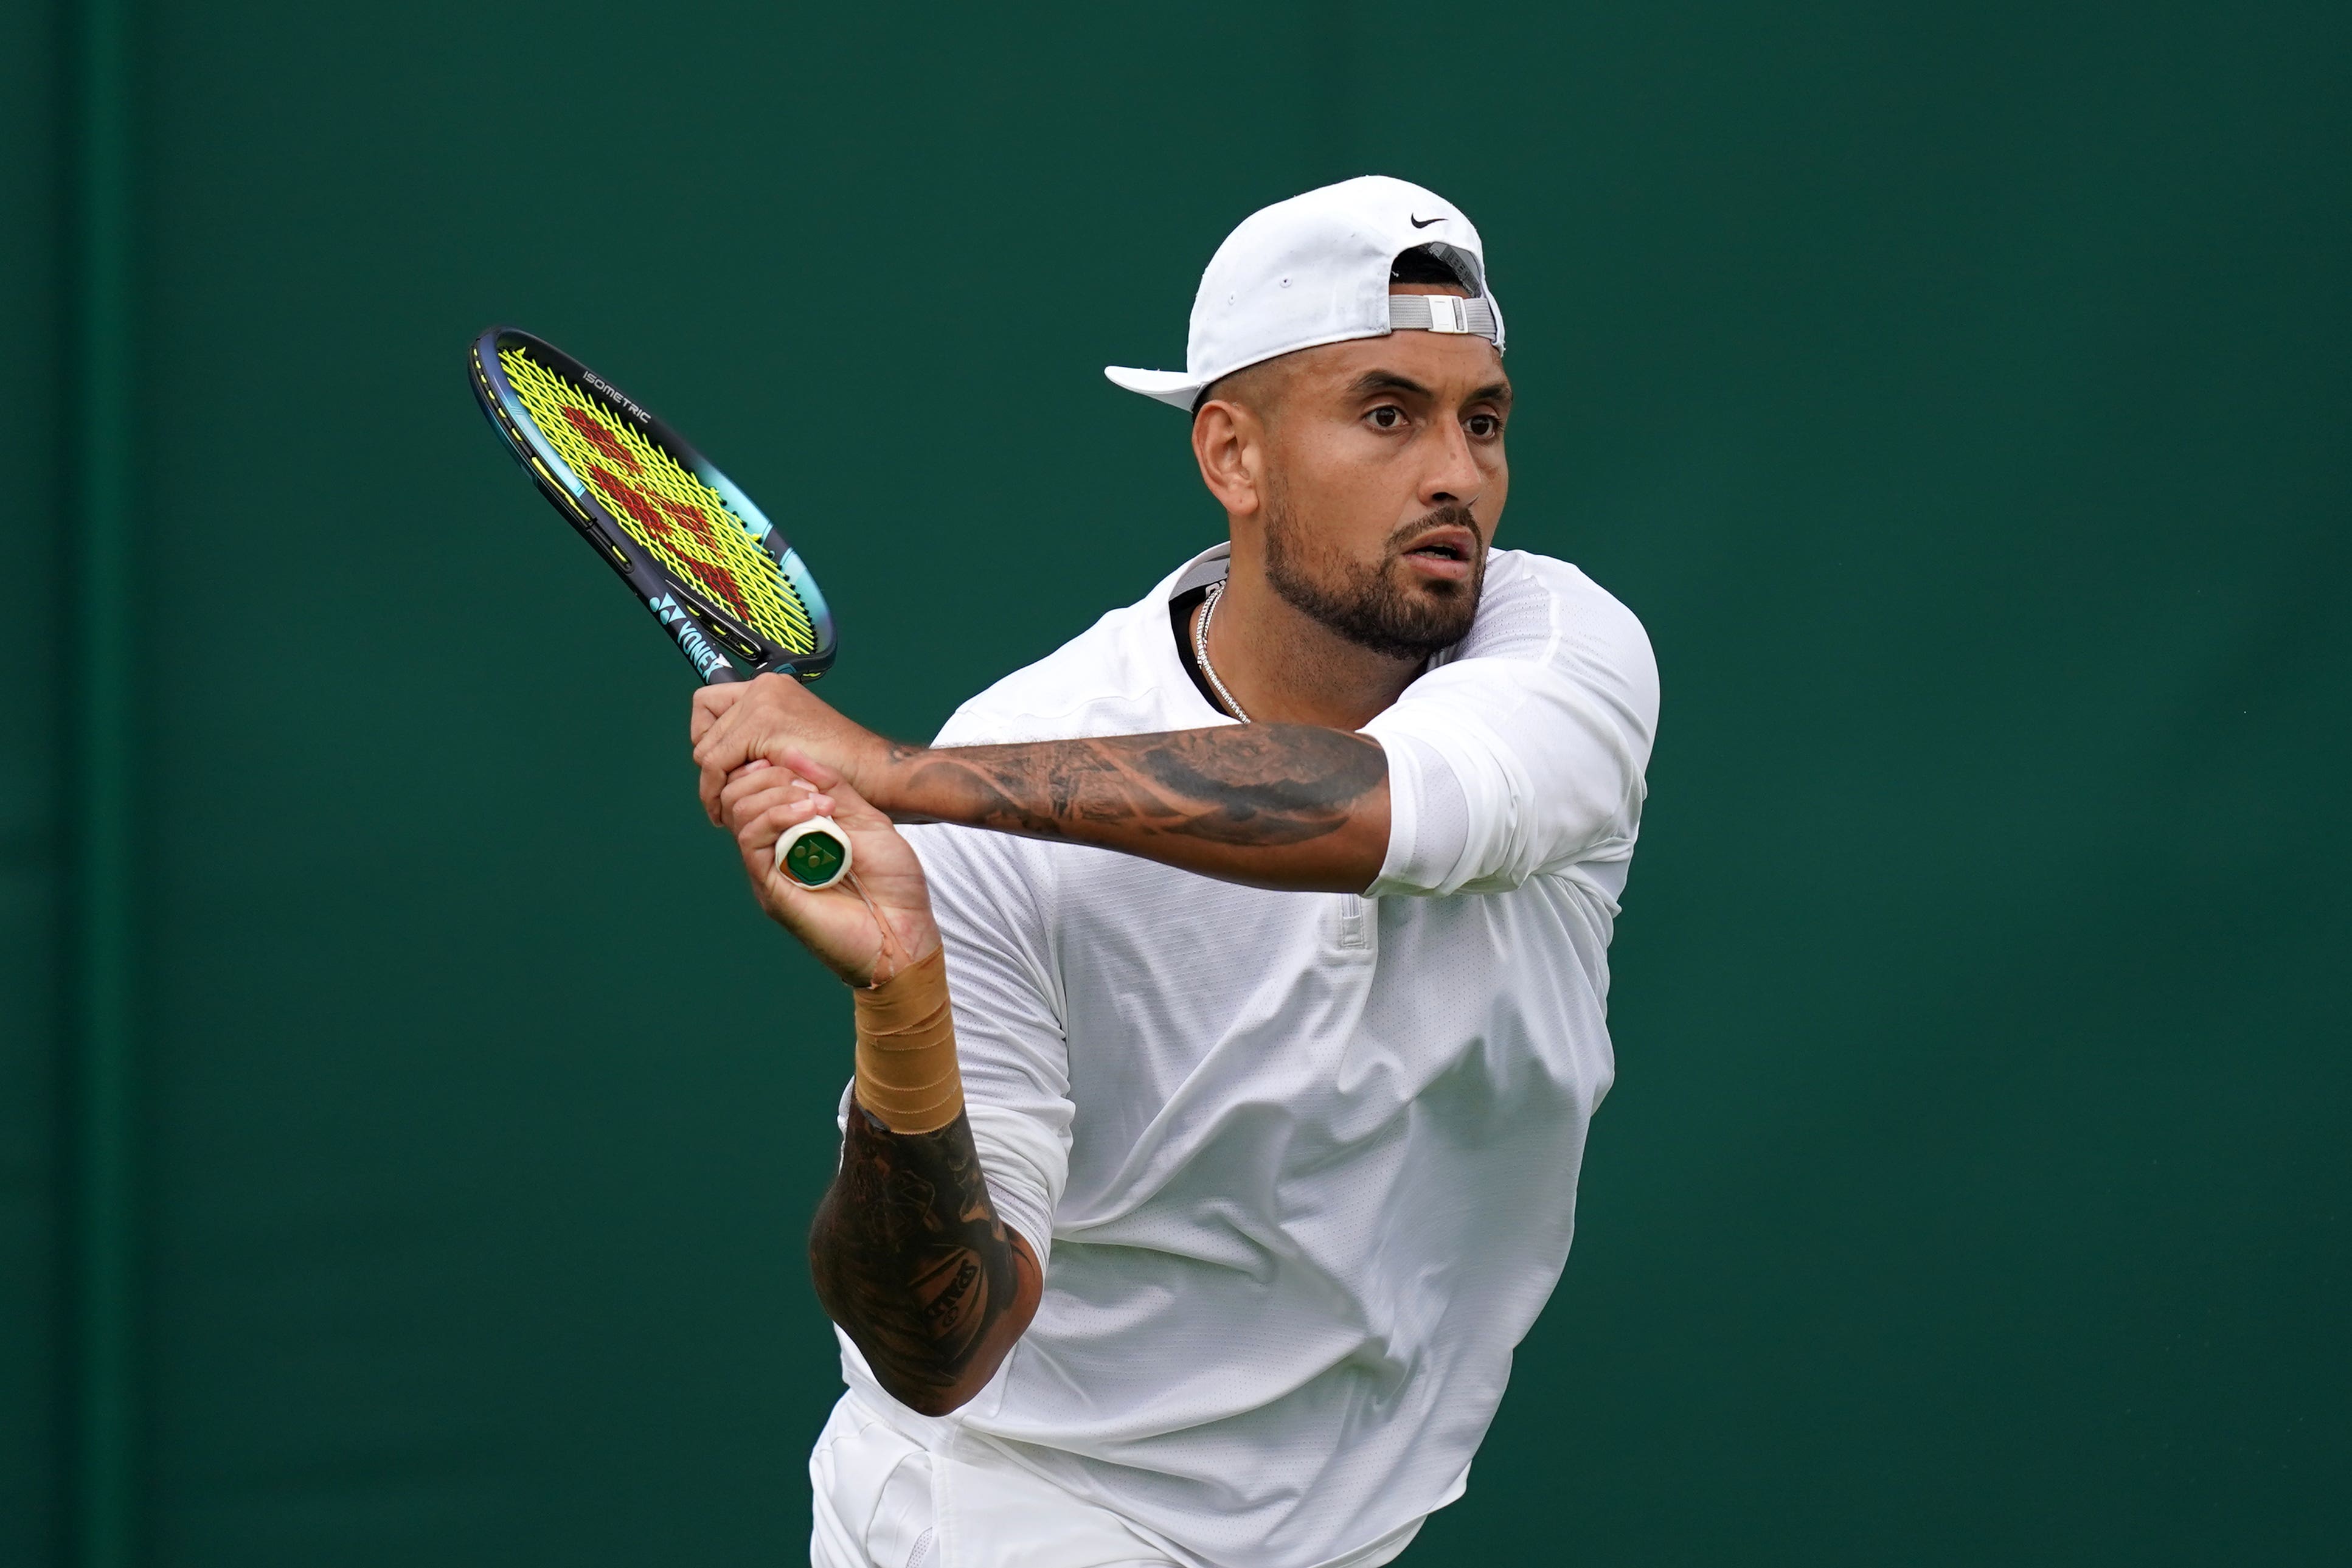 Australian tennis ace Nick Kyrgios admitted assaulting an ex-girlfriend, but avoided a criminal conviction